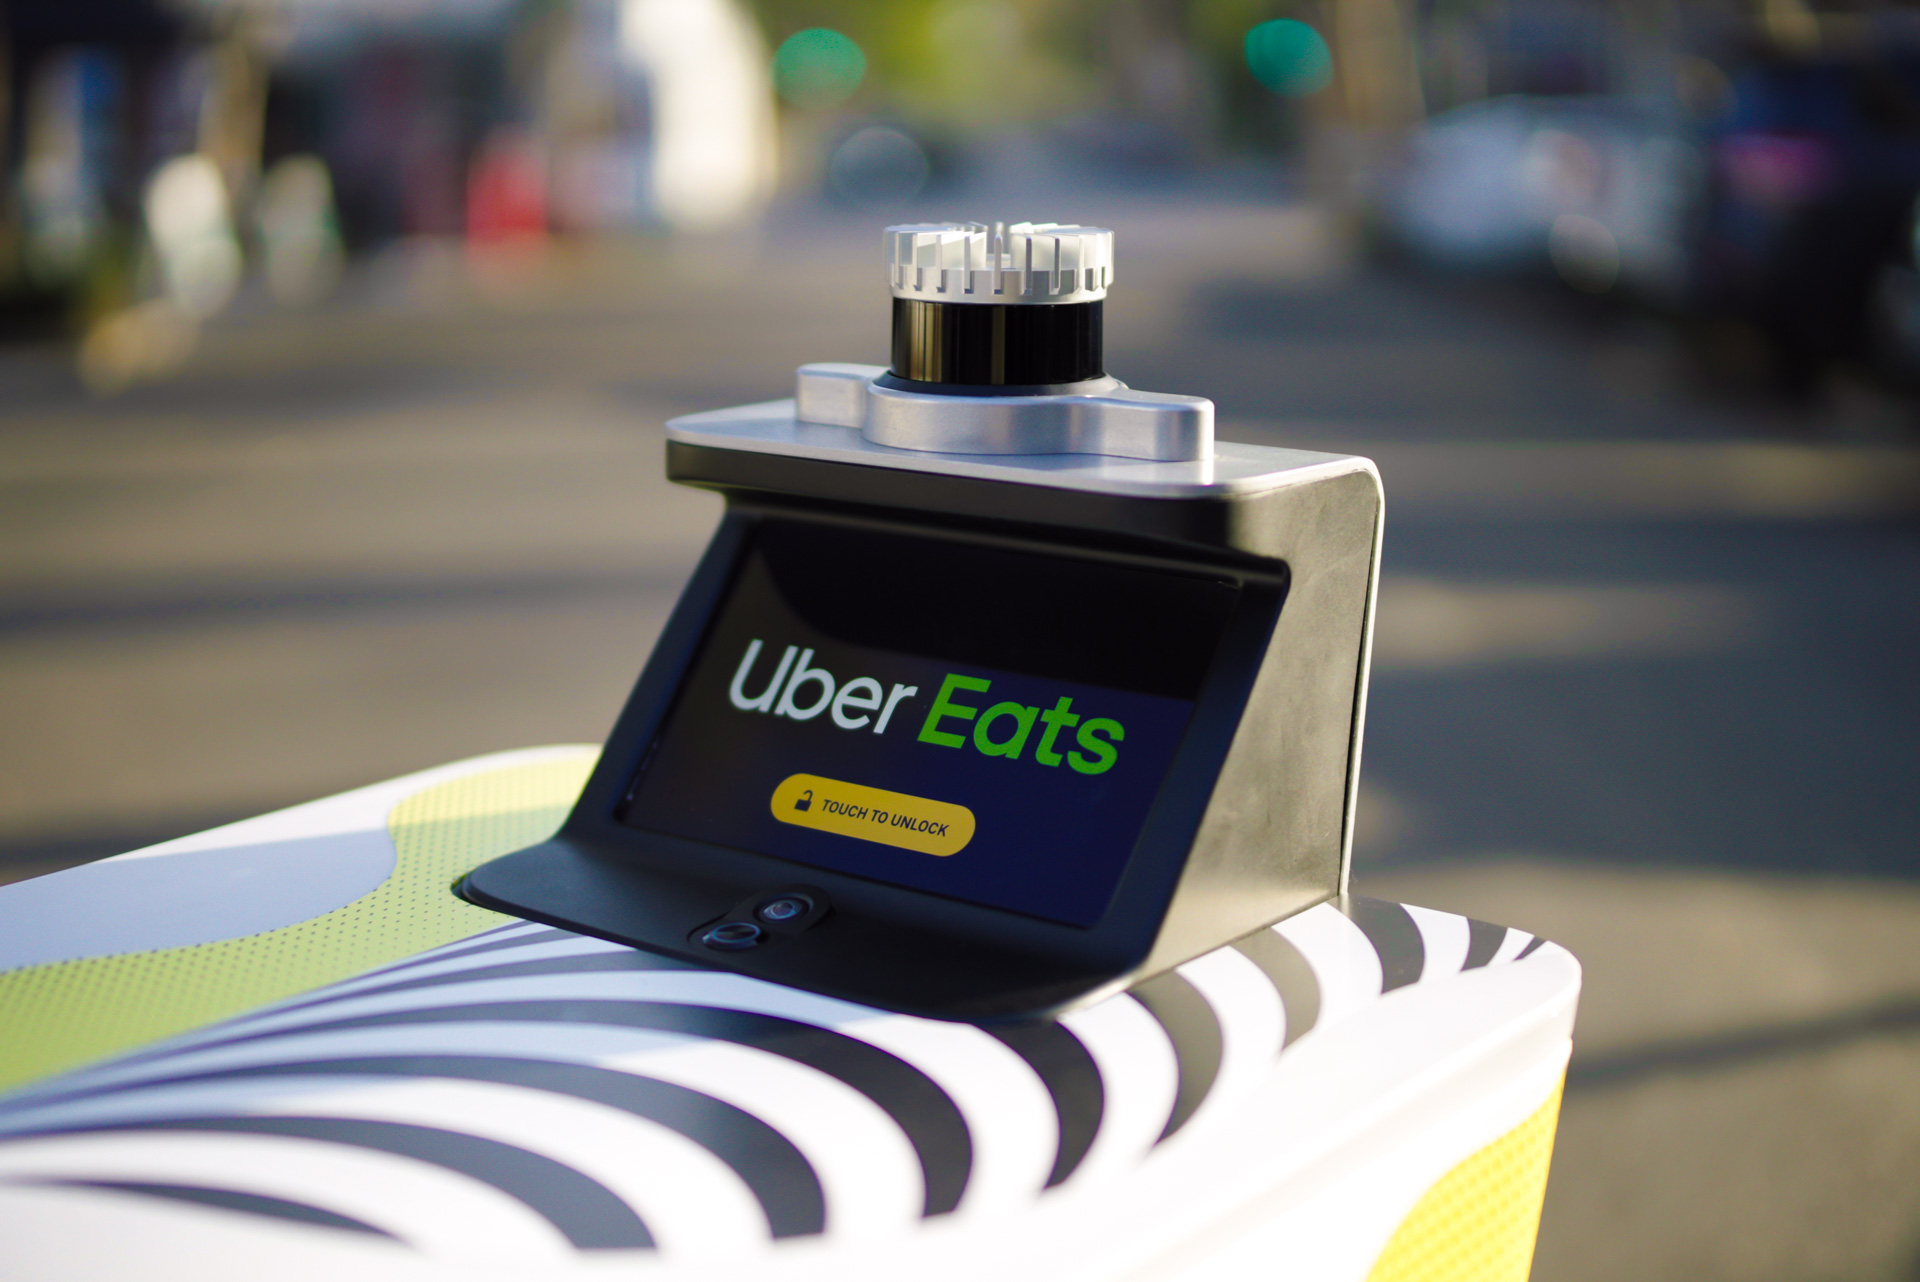 Robots serving with the brand of eating uber